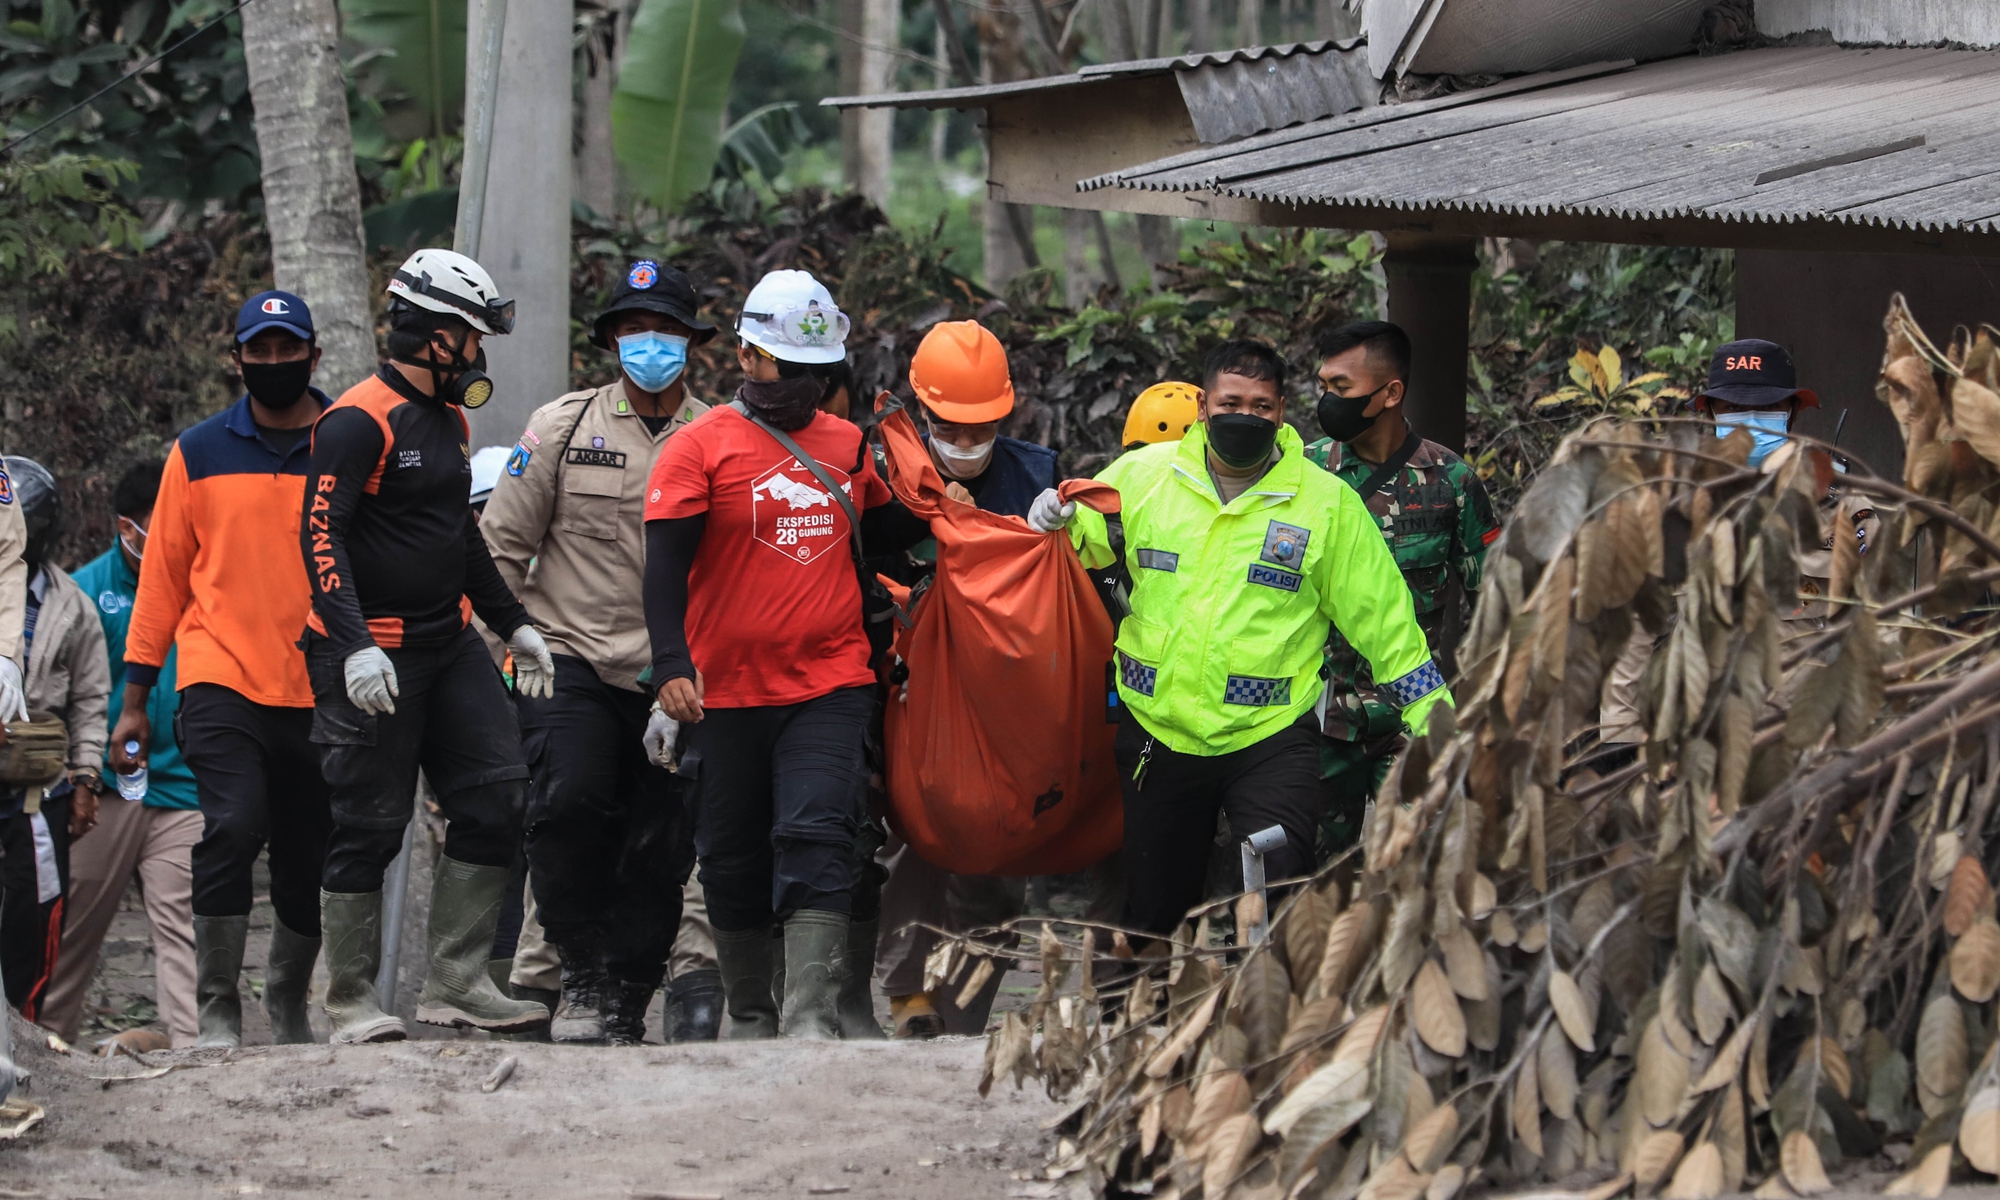 Rescue teams and residents carry dead victims of the Mount Semeru eruption in Sumberwuluh Village, Lumajang, East Java, on December 6, 2021. Photo: VCG